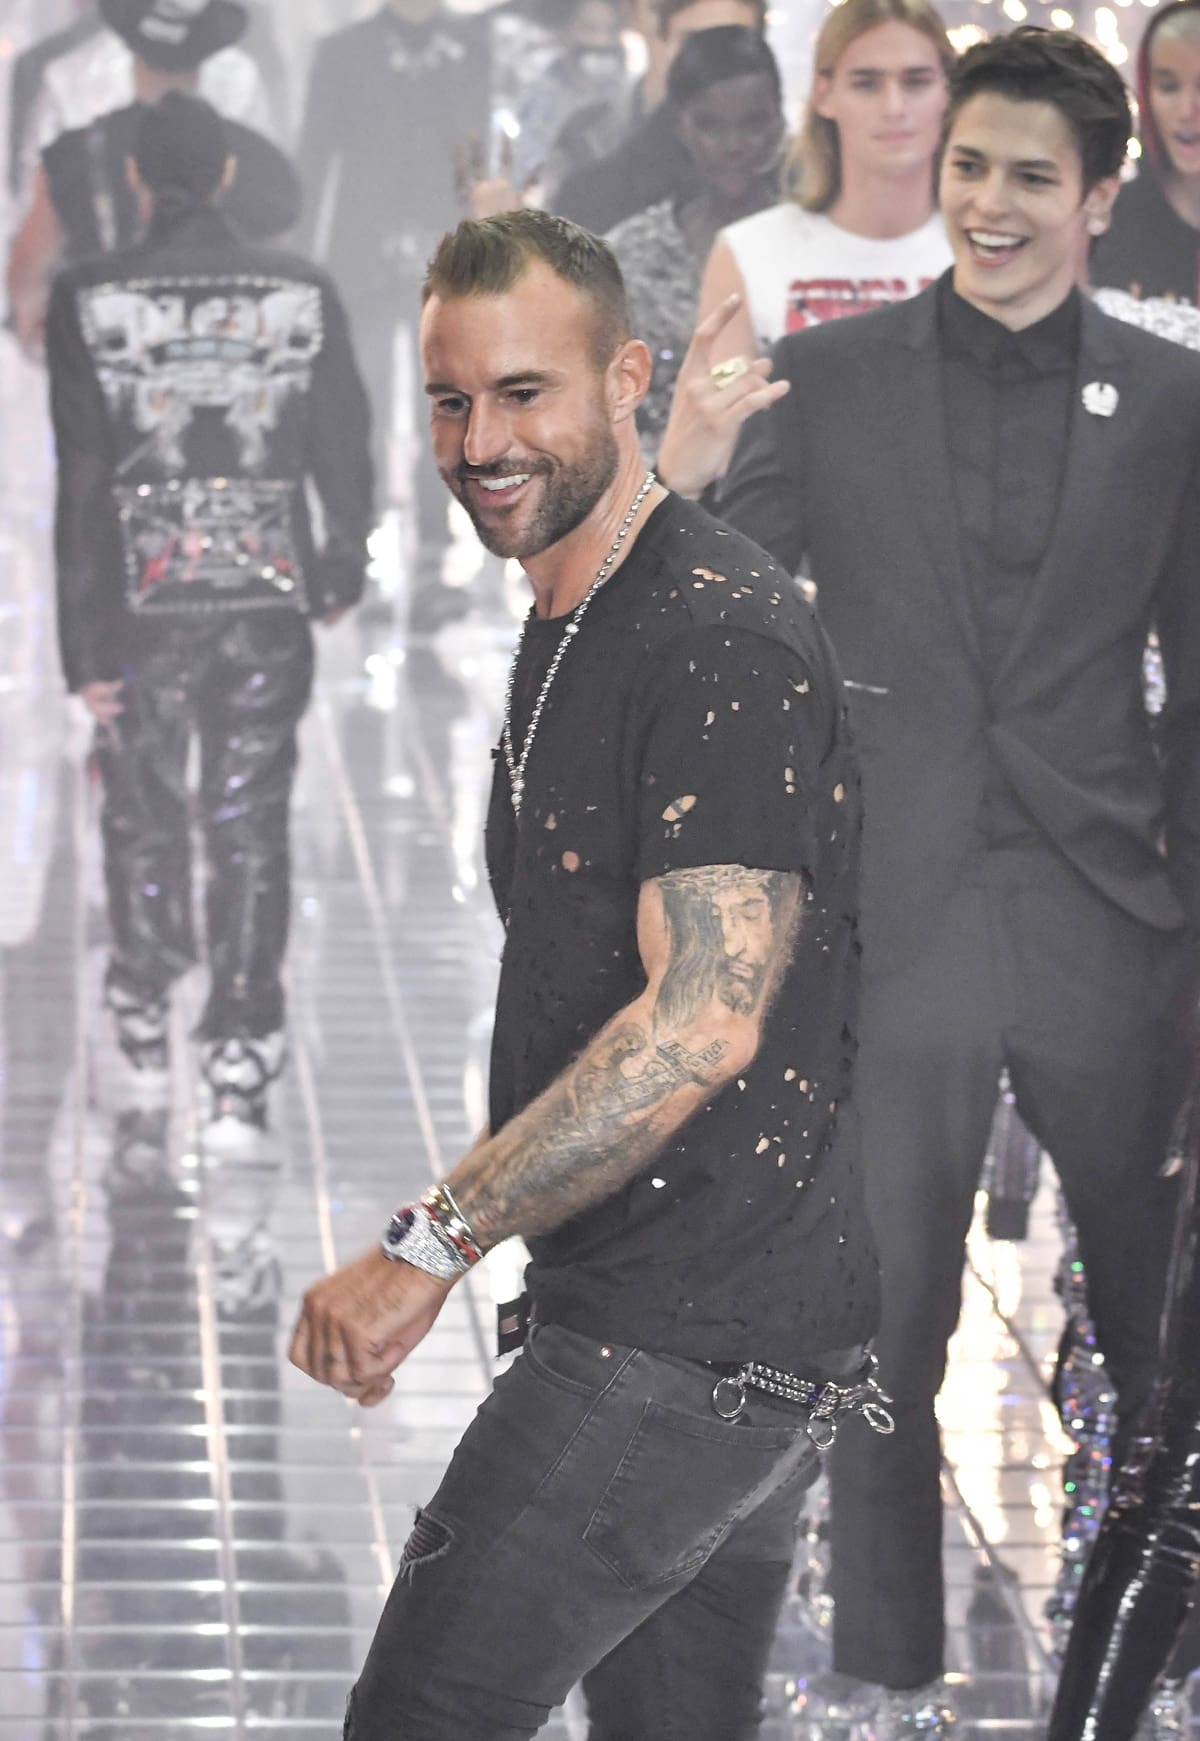 Philipp Plein's primary source of wealth comes from his ventures in the fashion industry